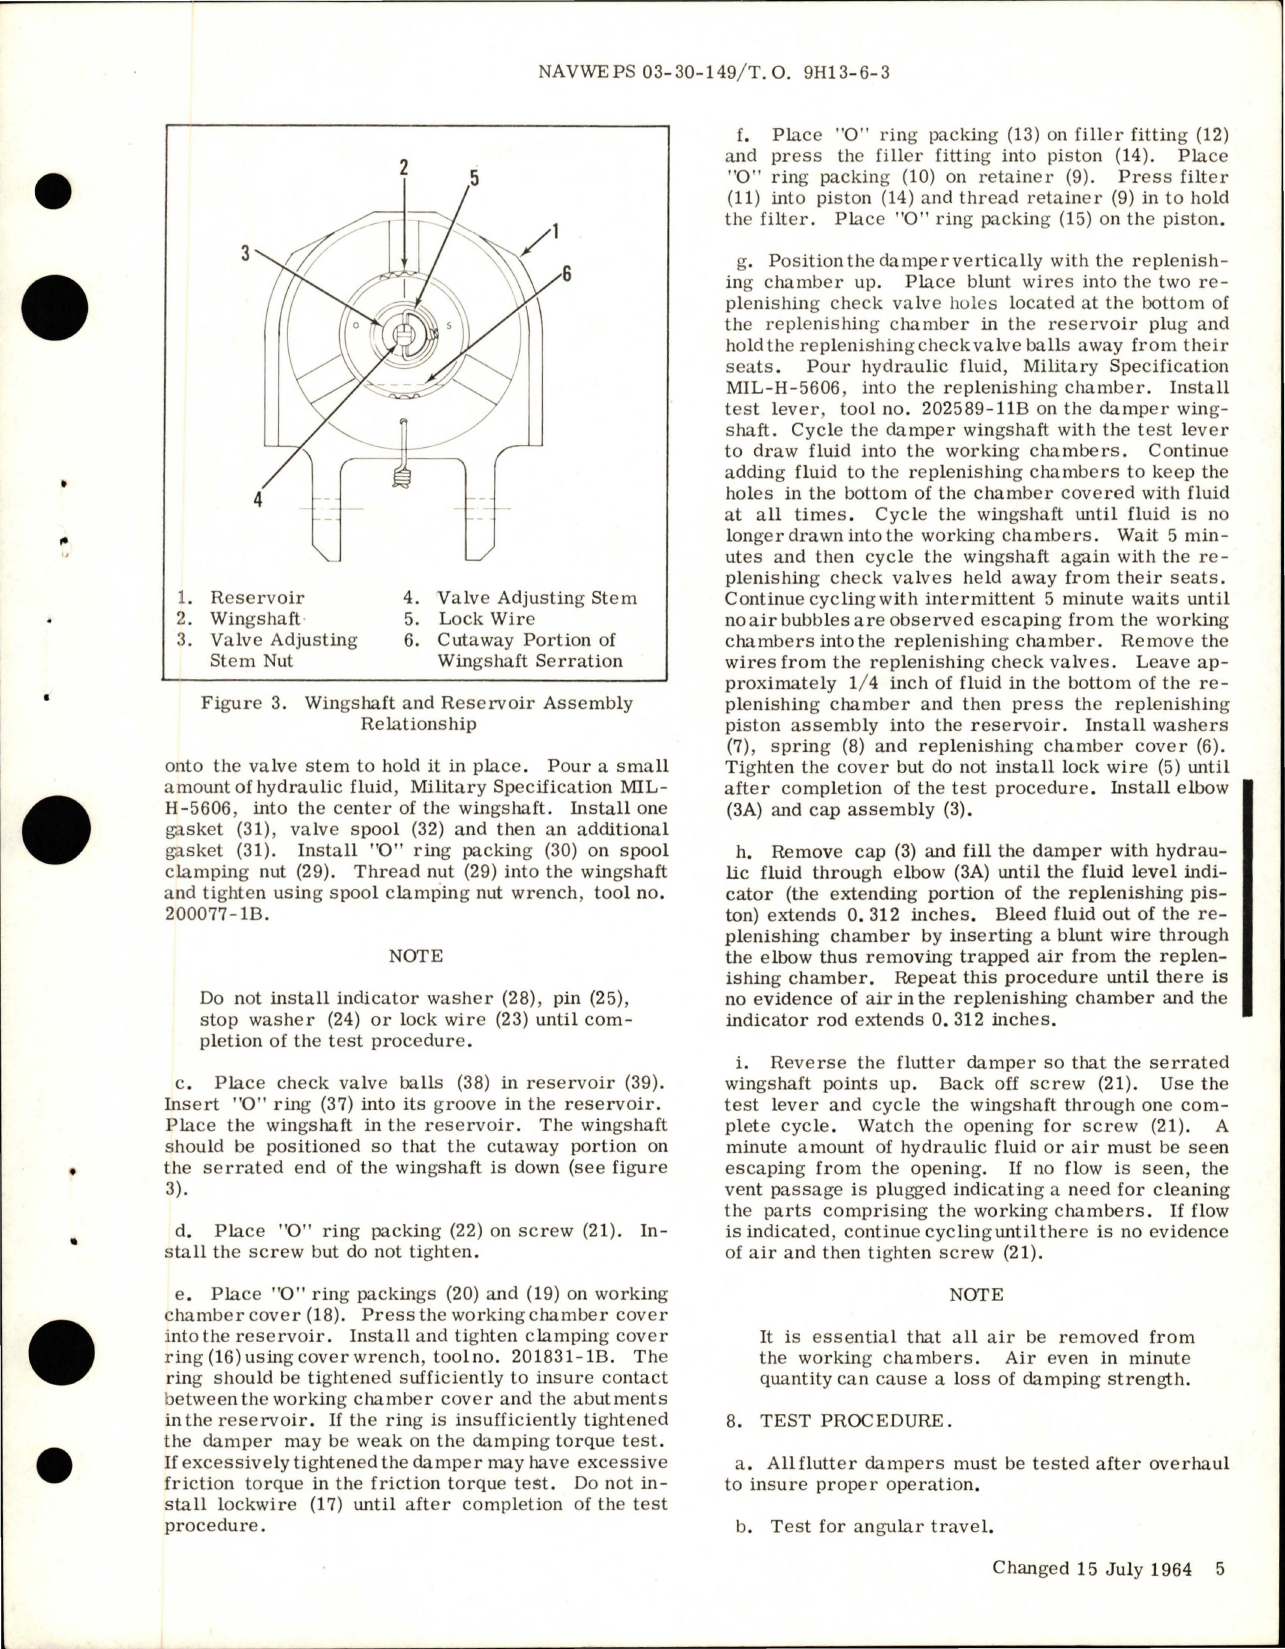 Sample page 7 from AirCorps Library document: Overhaul Instructions with Parts Breakdown for Rudder Flutter Damper - Part 305670-1 